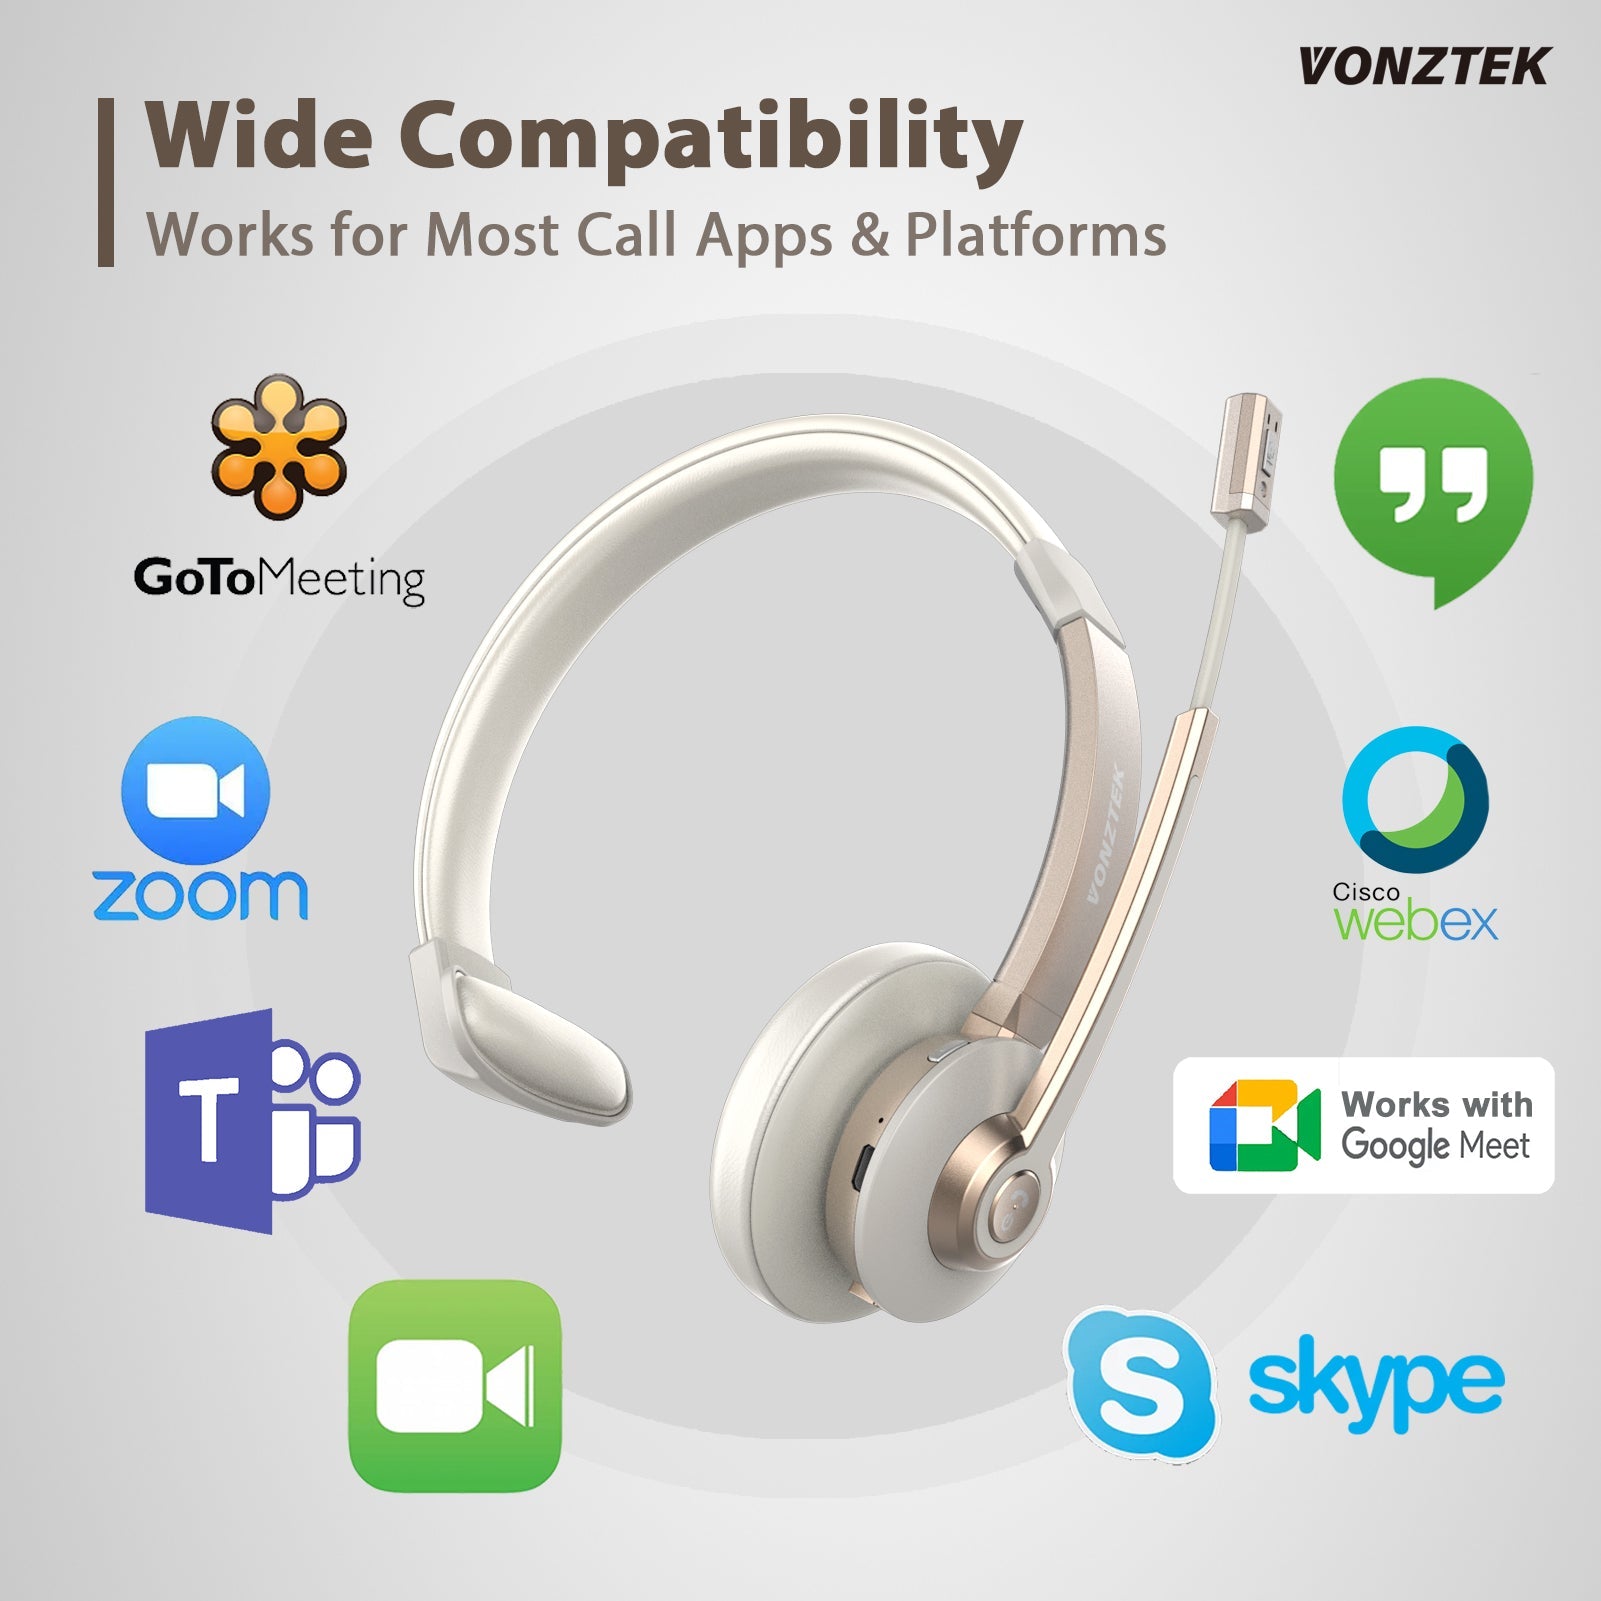 Wide compatibility,Works for most call Apps &  platforms,Goto meeting,Zoom,Webex,Works with google meet,Skype.